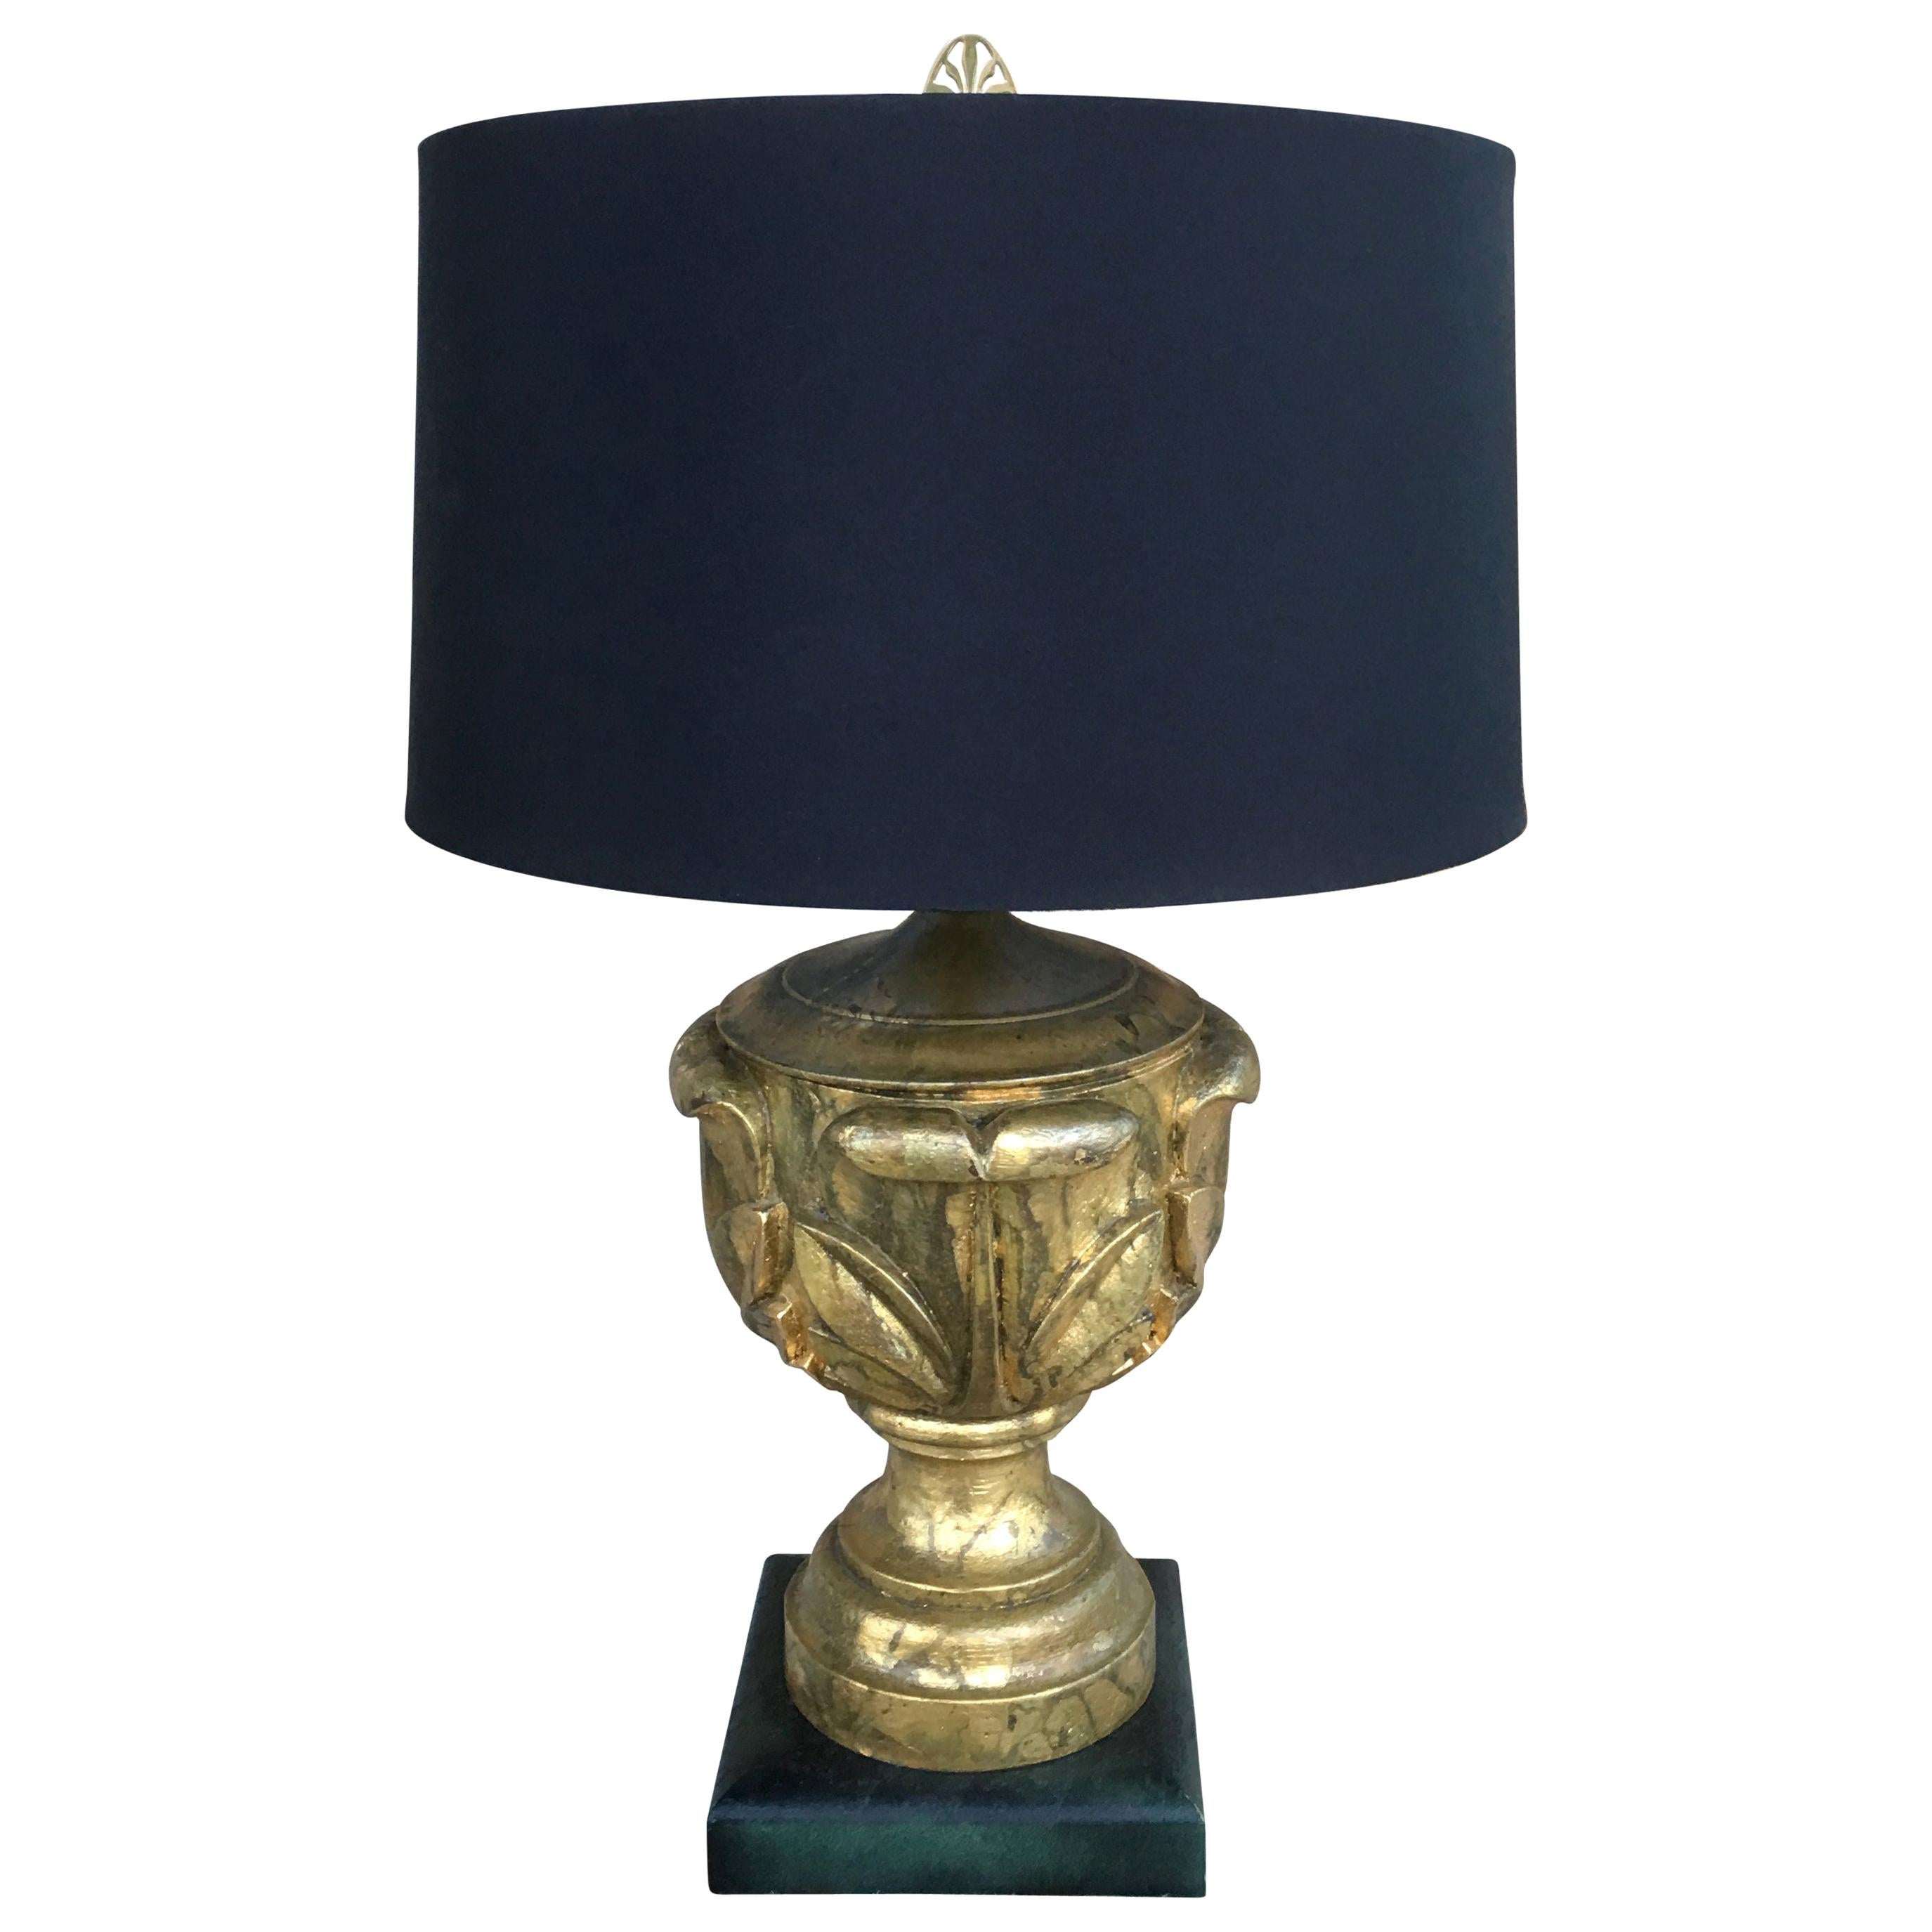 Hollywood Regency Table Lamp in Gold Leaf with Black Shade